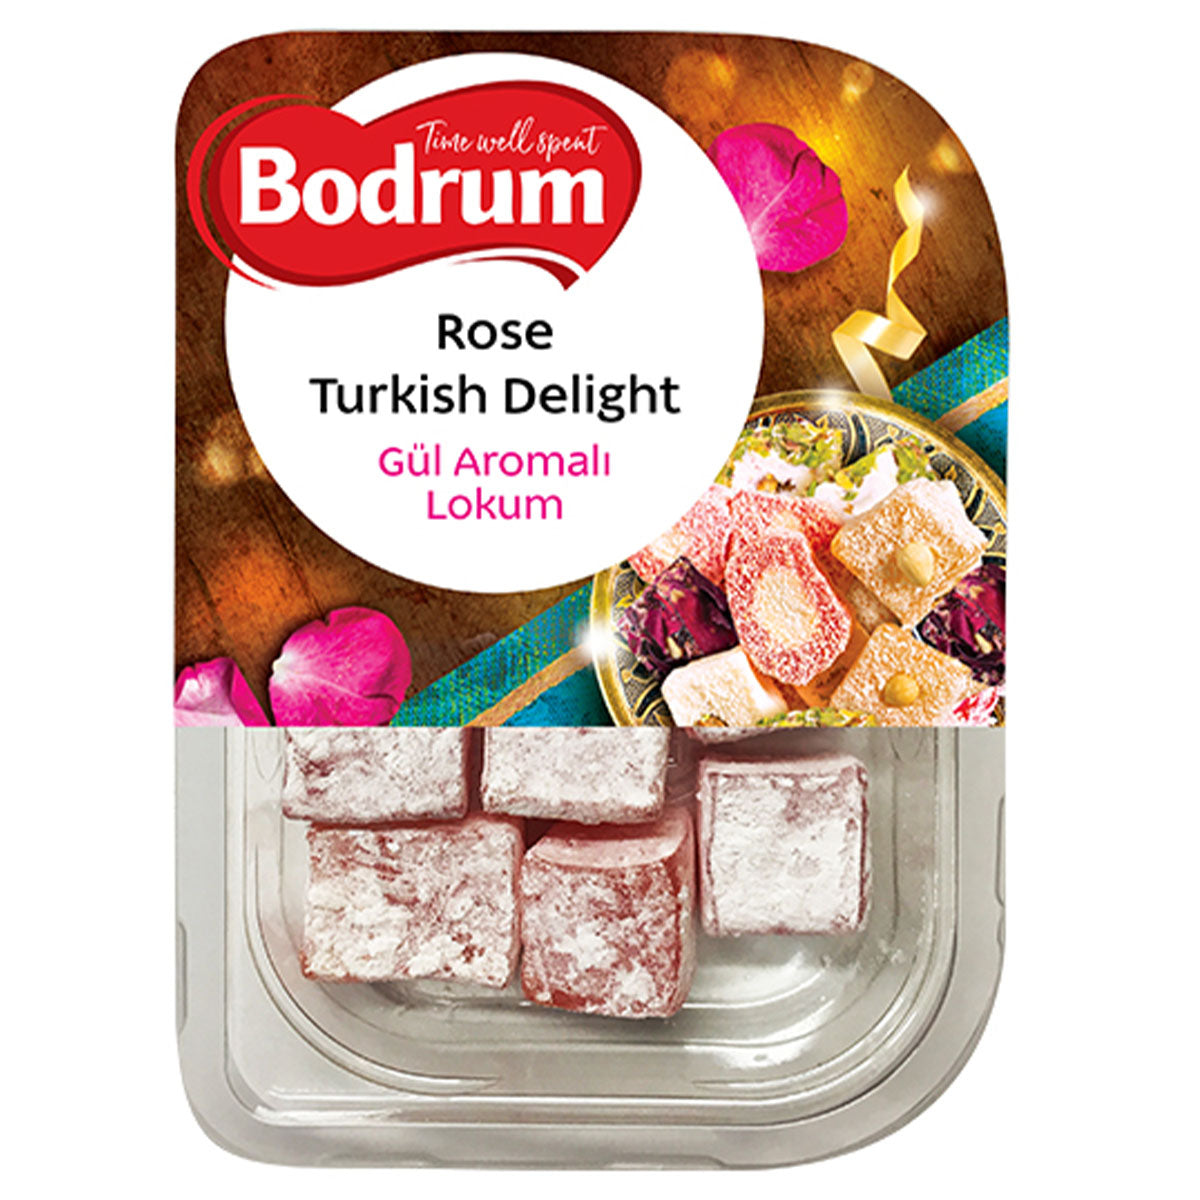 Bodrum - Rose Turkish Delight - 200g - Continental Food Store